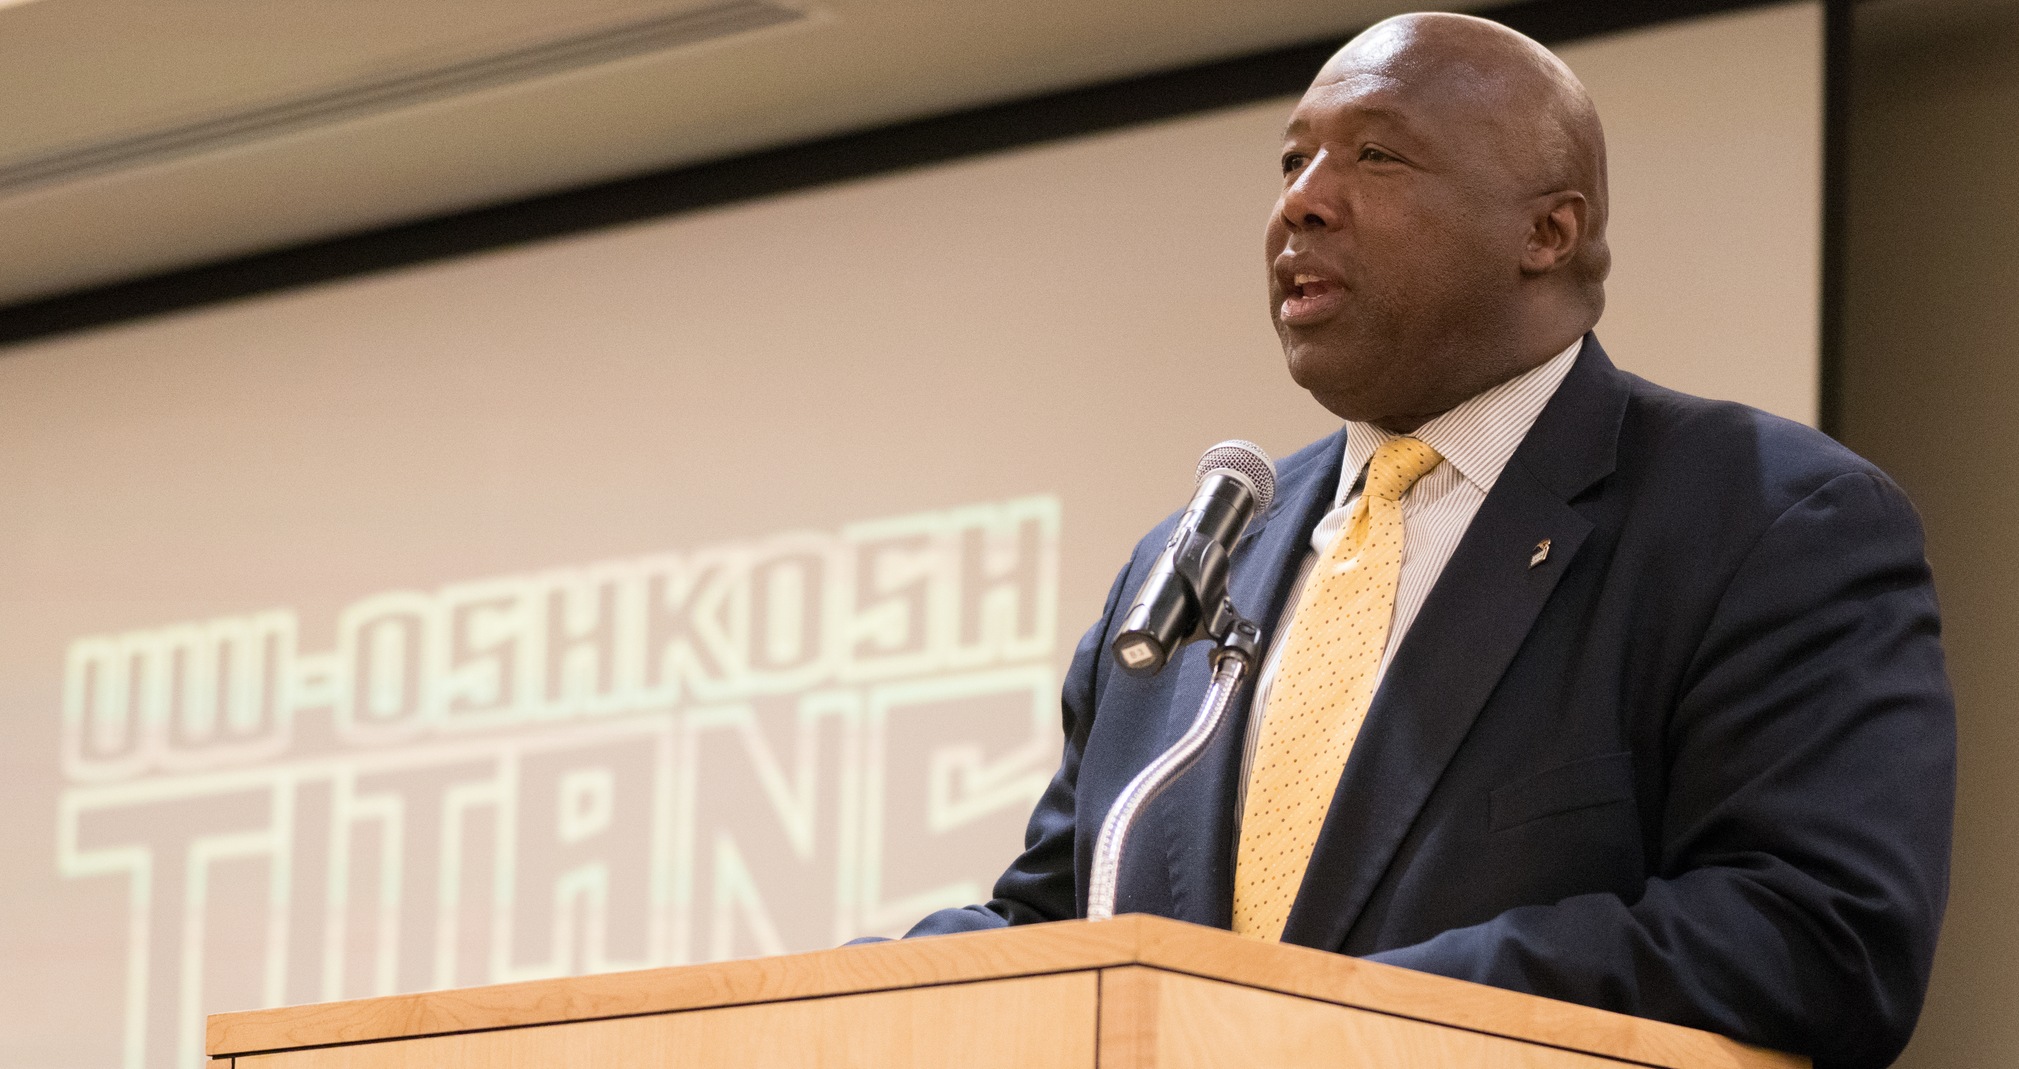 Darryl Sims is in his ninth year as UW-Oshkosh's Assistant Chancellor & Director of Athletics.